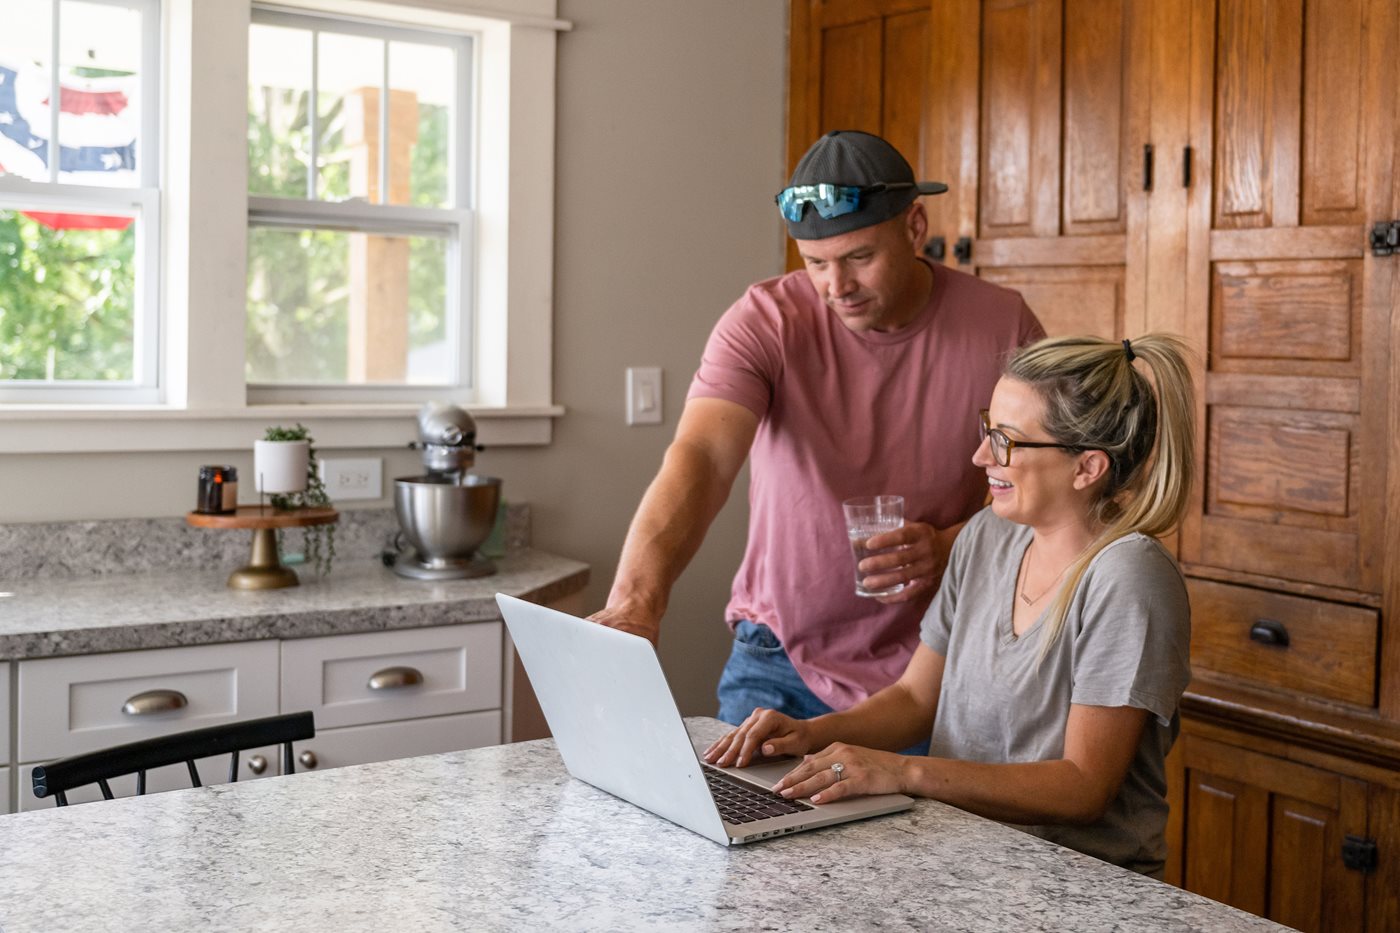 A military service member and his wife look at a laptop in their kitchen while searching for military streaming discounts